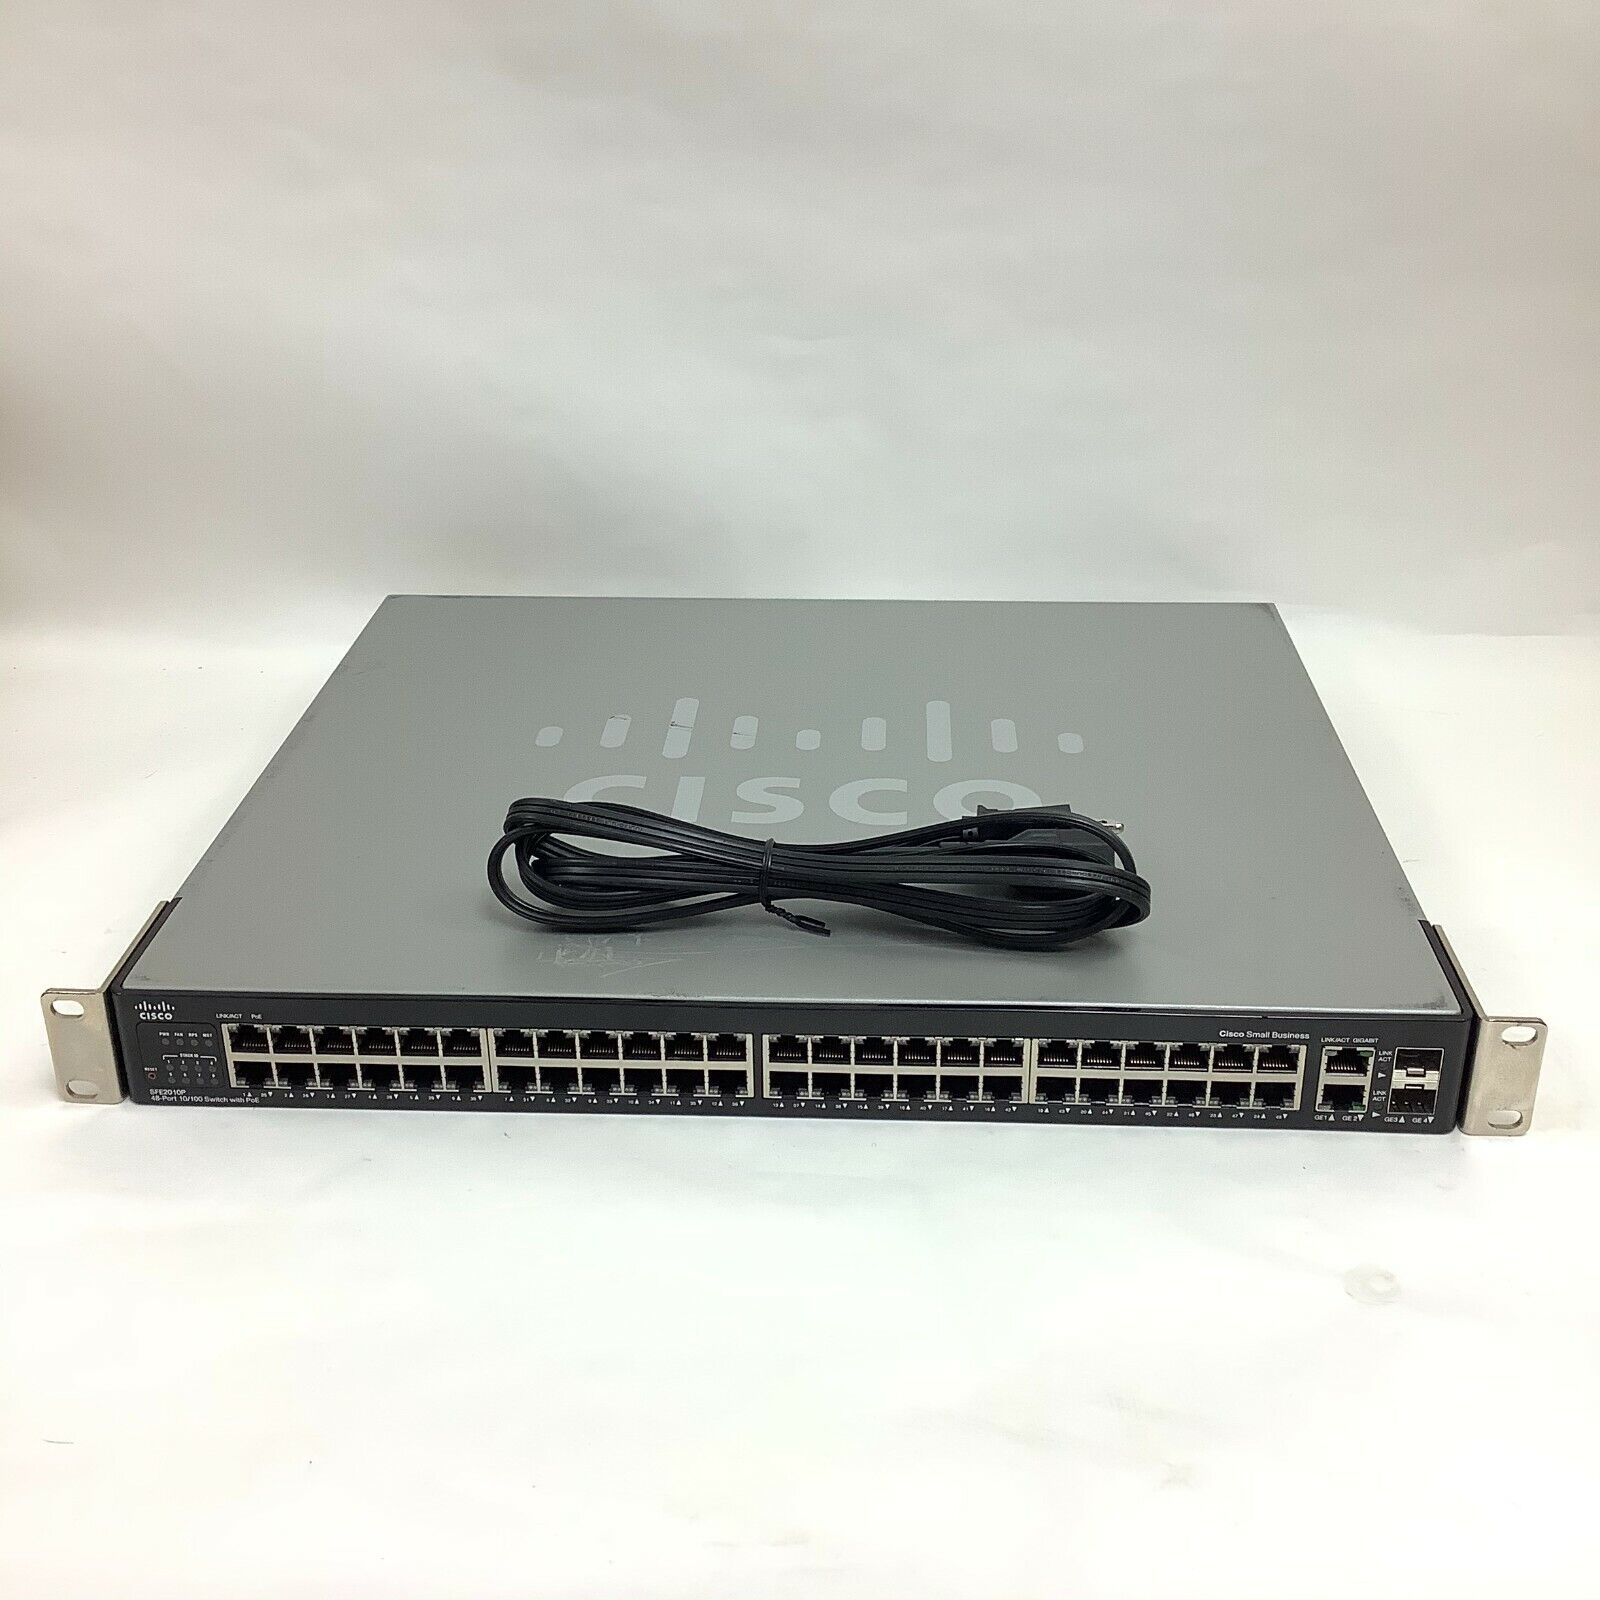 Cisco SFE2010P 48-Port 10/100 Ethernet Network Switch with PoE